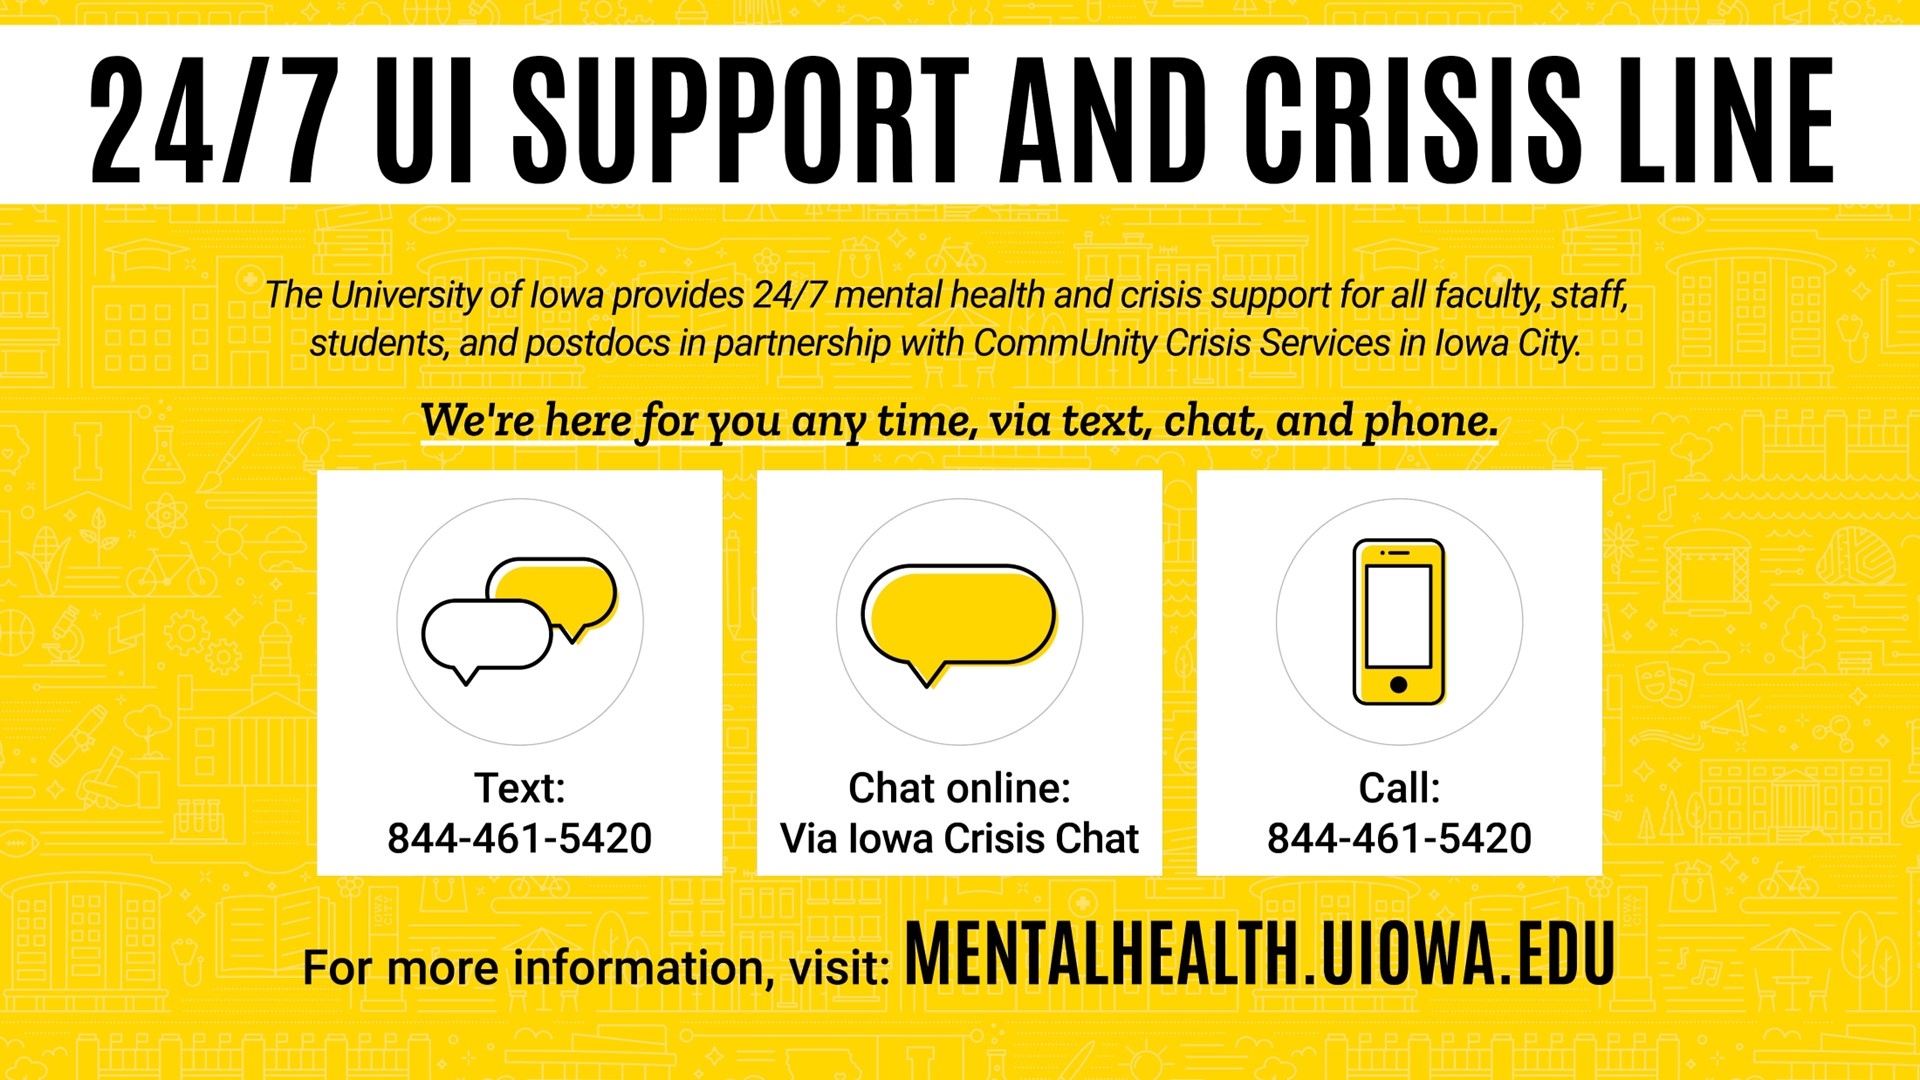 24/7 UI support and crisis line. Via text, chat, and  phone. more info at mentalhealth.uiowa.edu